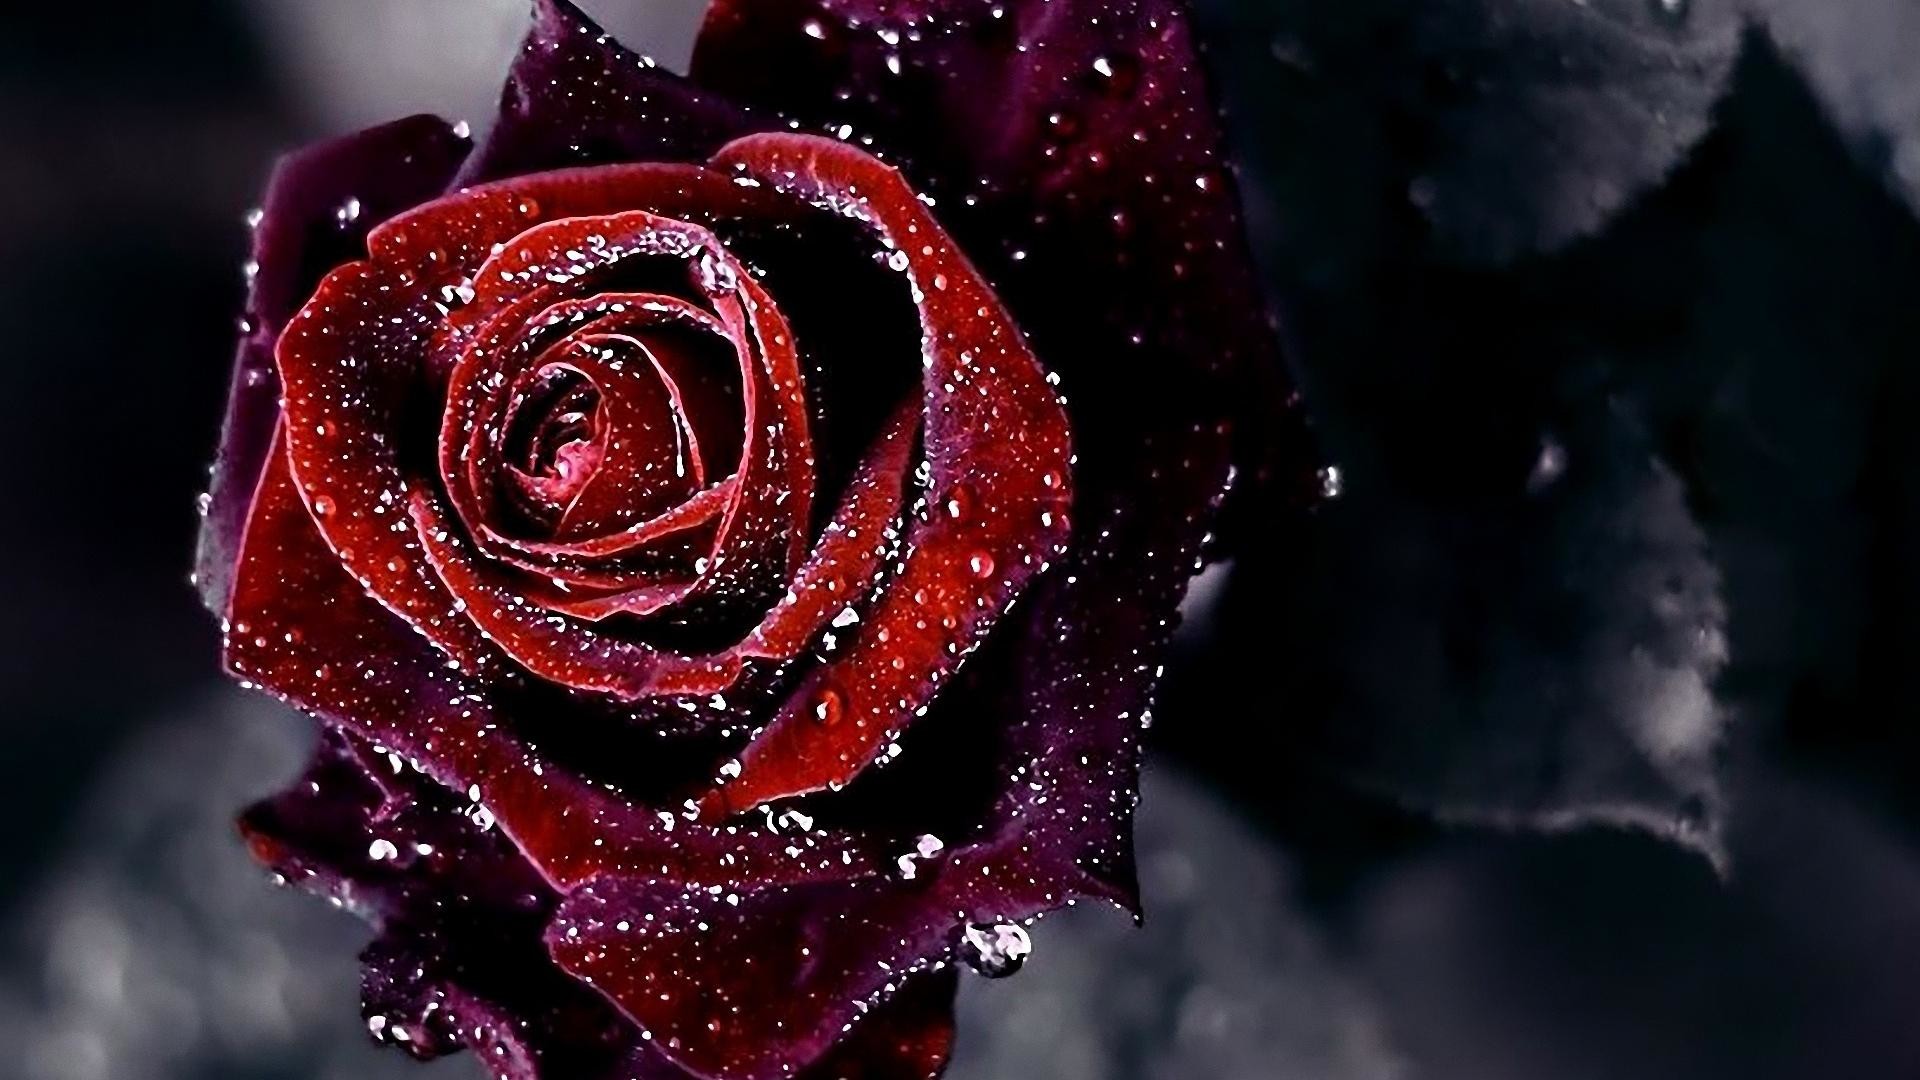 Red Rose Images